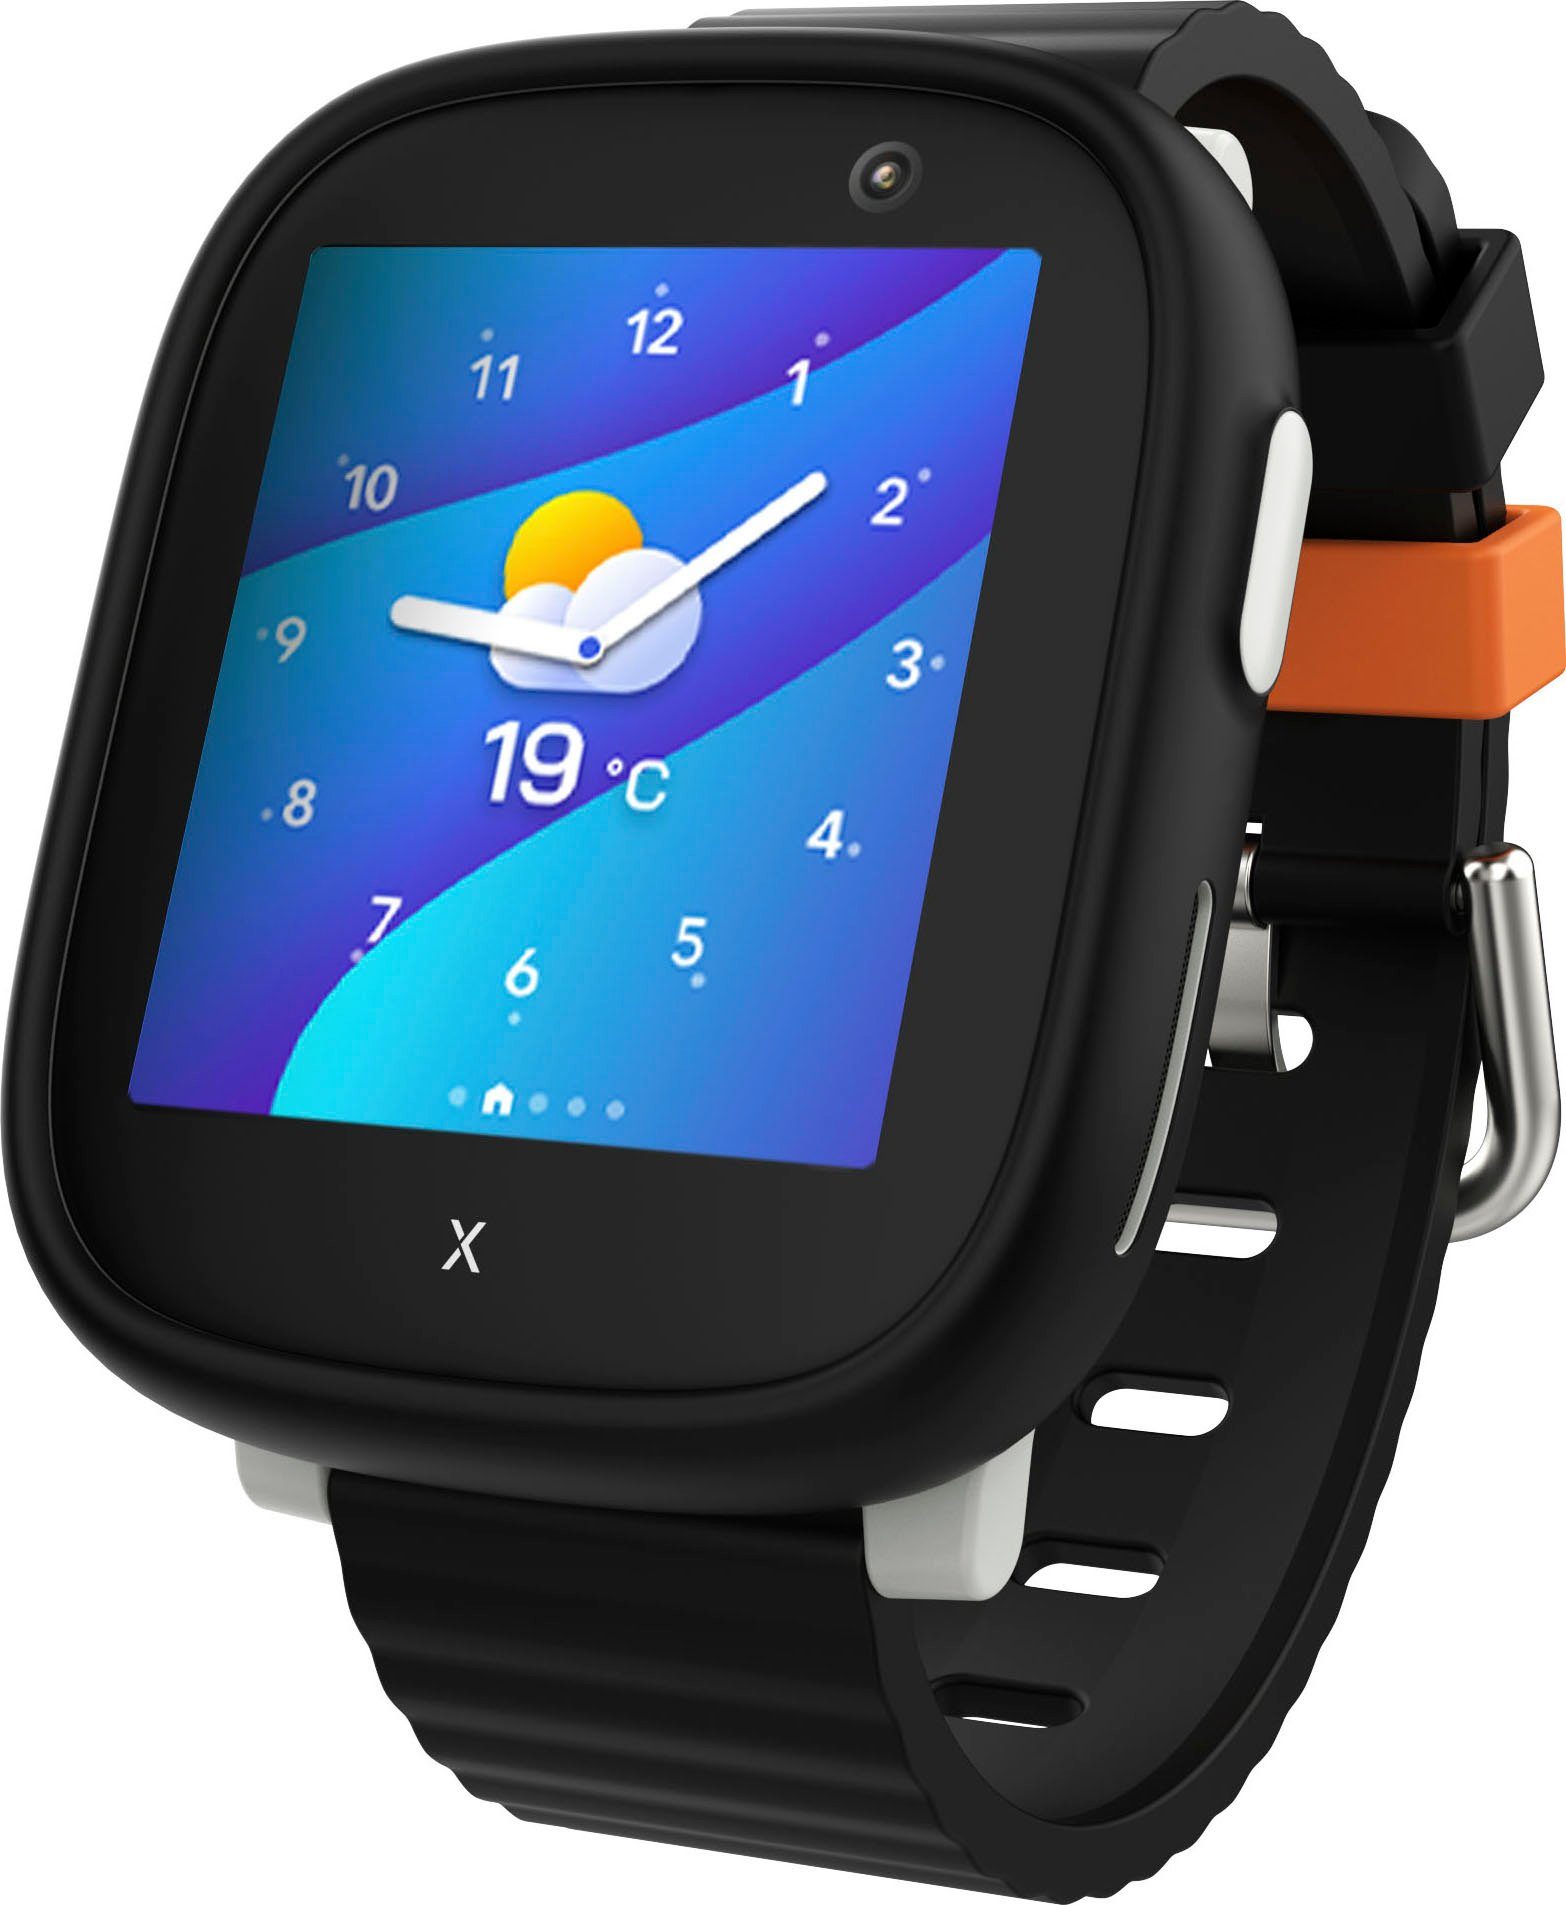 Sim Kinder (3,86 Android Xplora X6Play Smartwatch Zoll, Connect Karte cm/1,52 inkl. Wear),